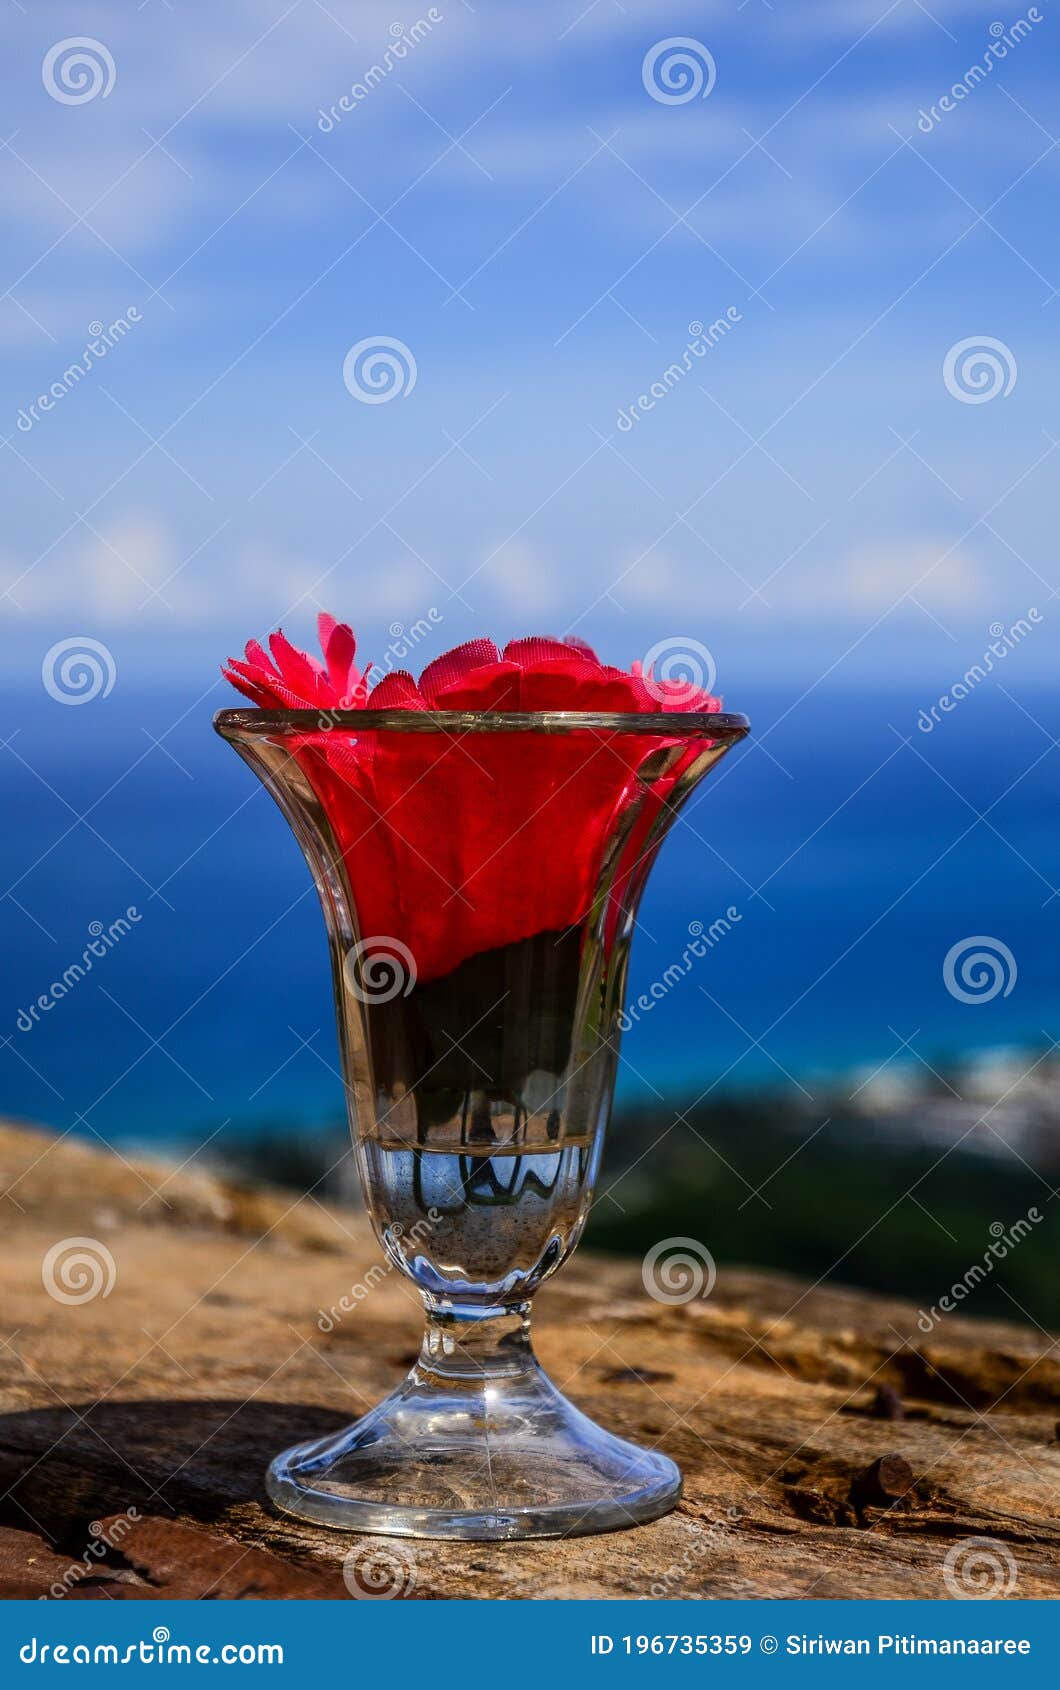 wellcome drink : cold water and red flower in clear glass on blue sky background